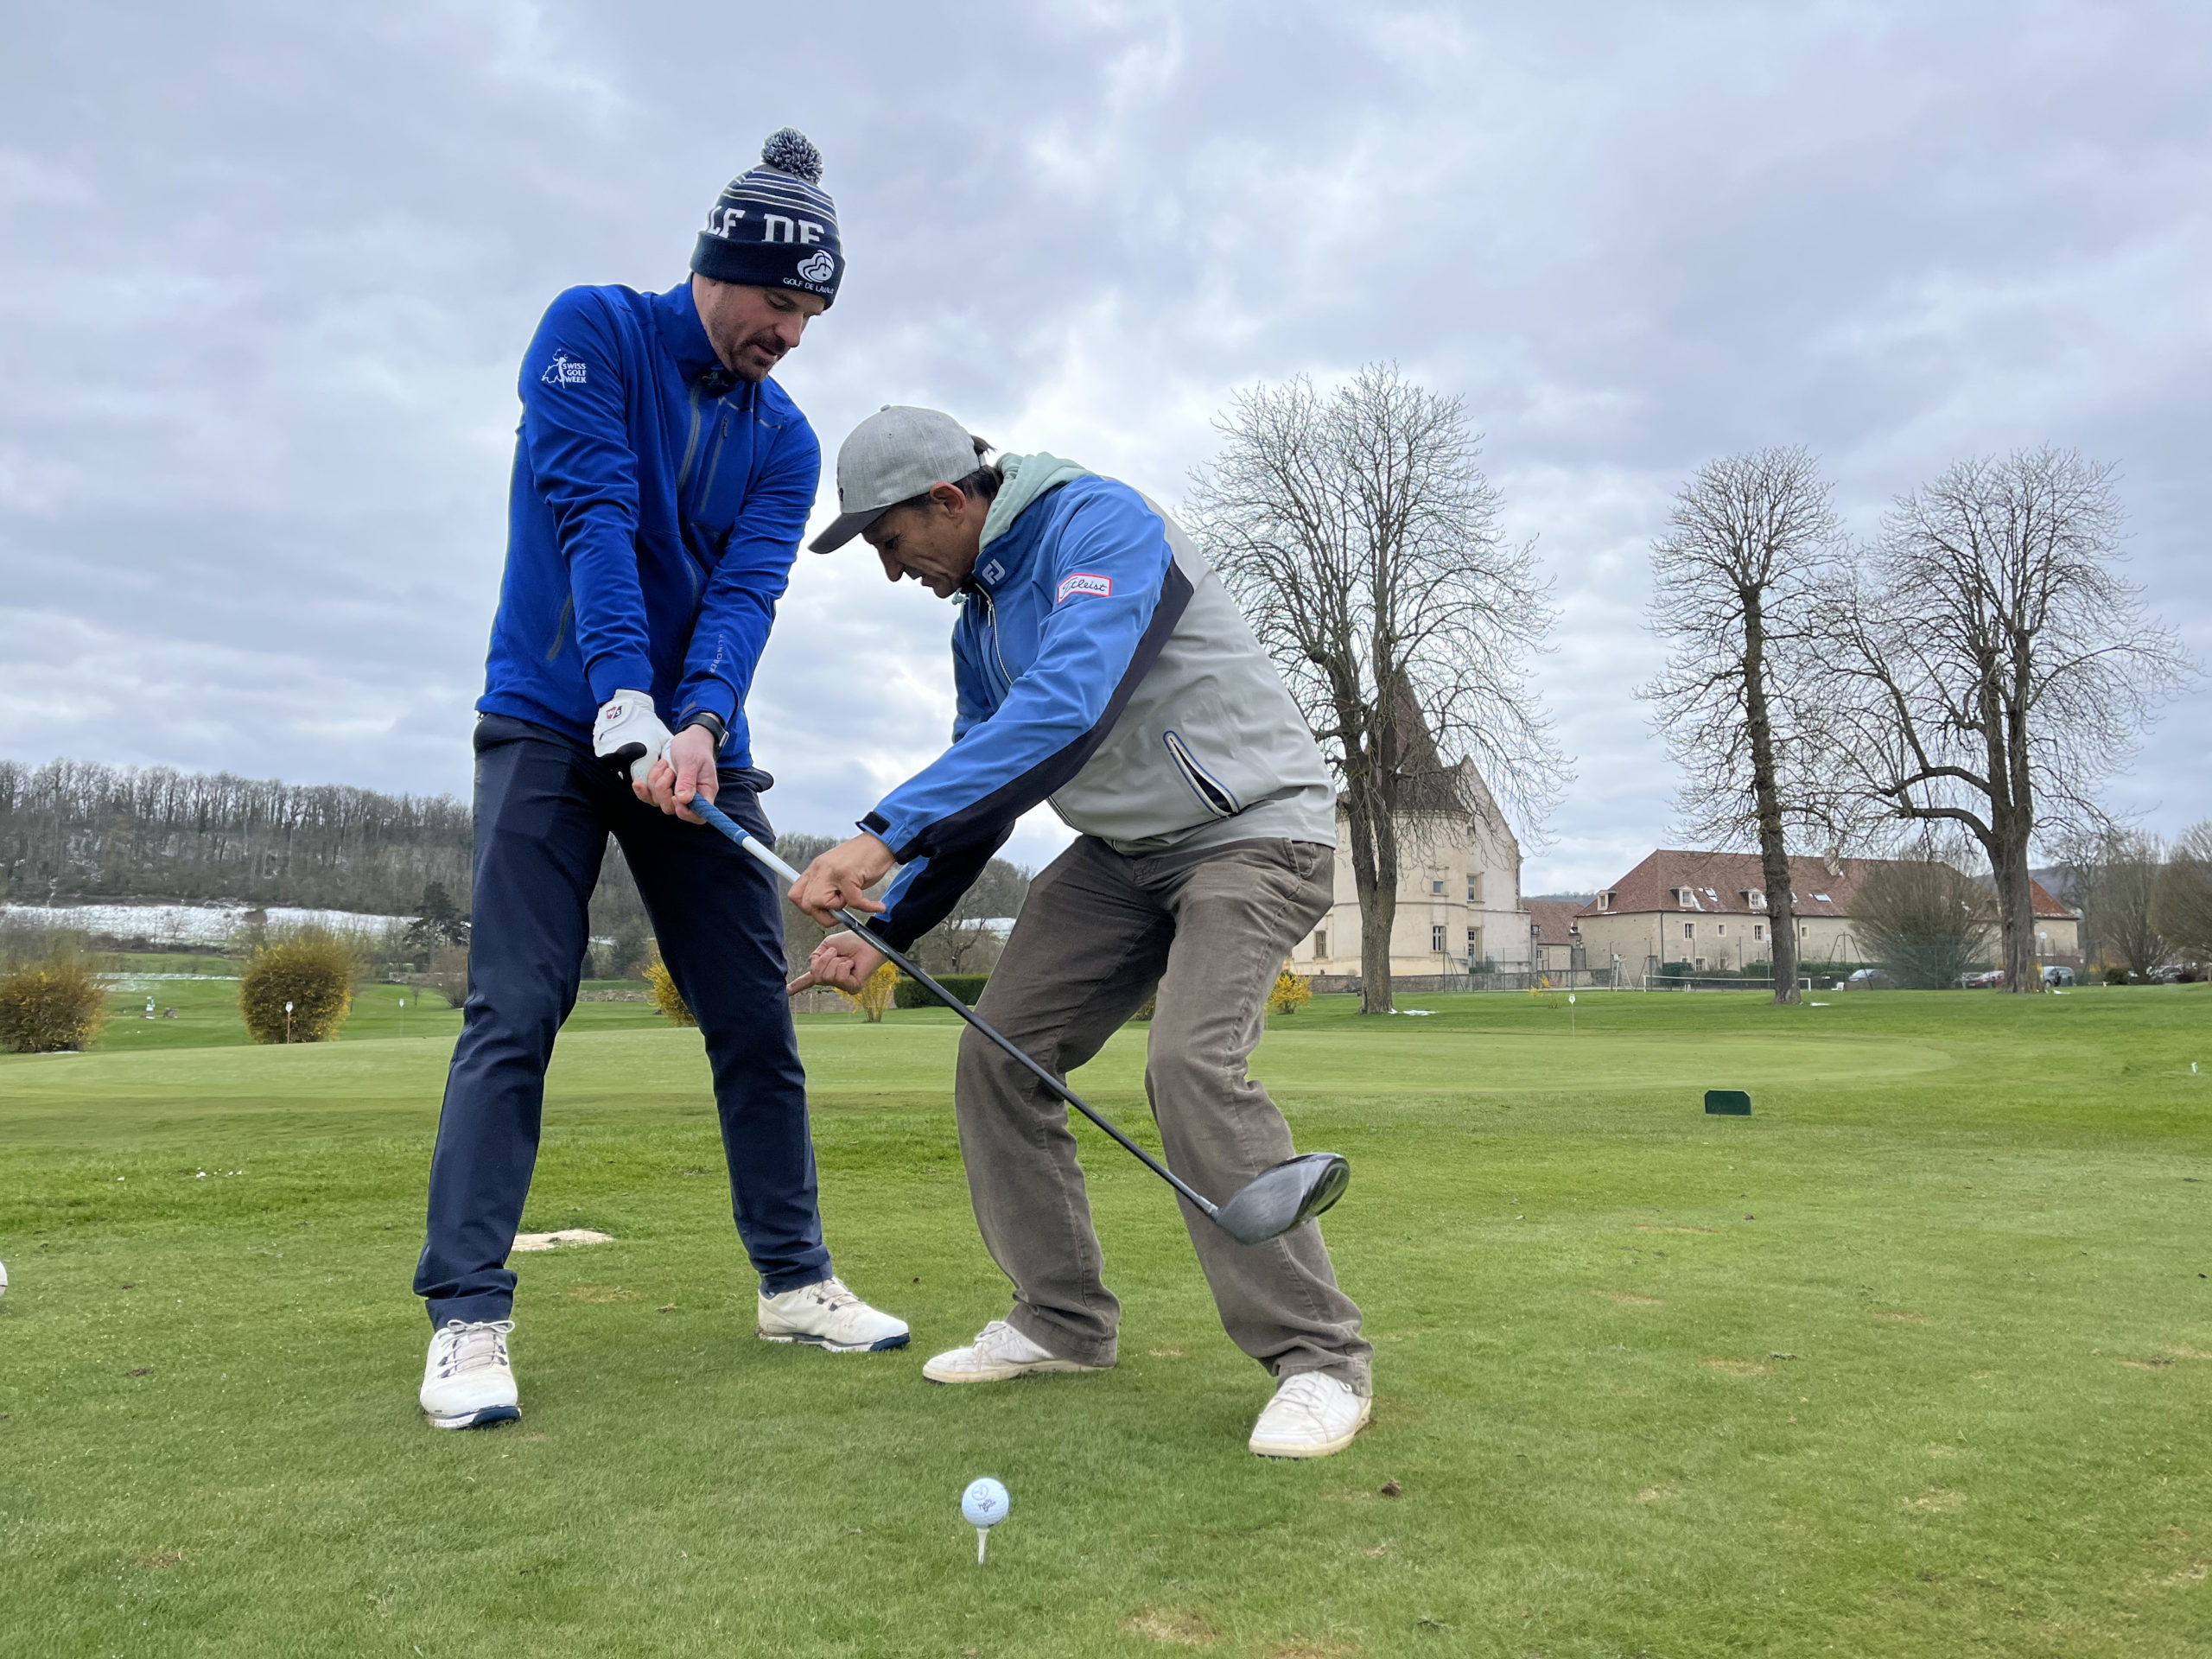 On course Coaching with Stephane Barras - Caddie Player by Hello Birdie